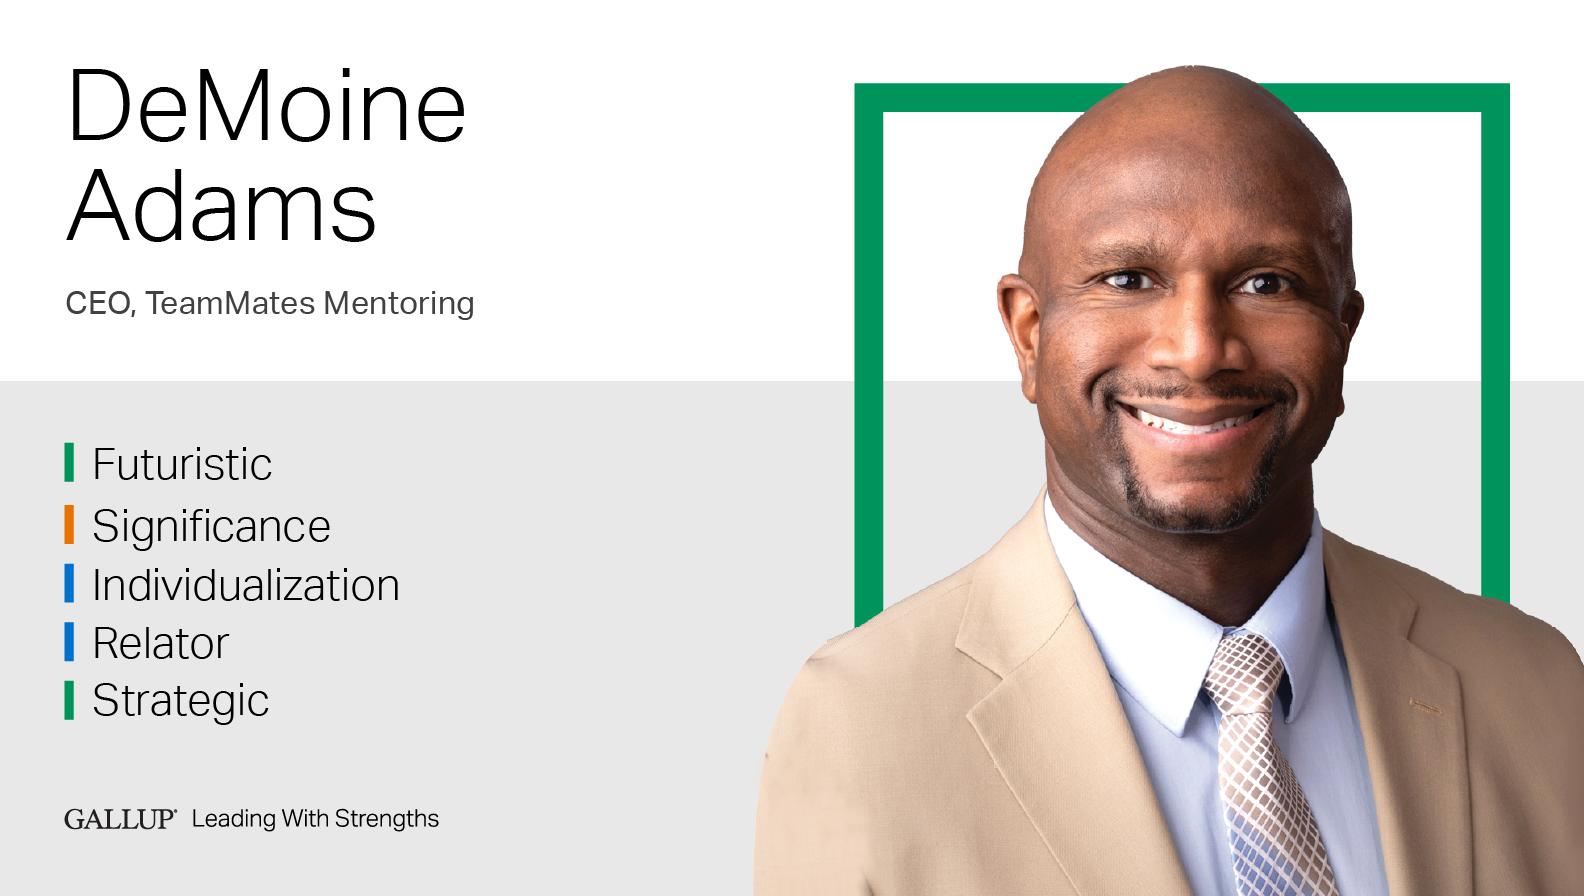 CEO, TeamMates Mentoring FUTURISTIC | SIGNIFICANCE | INDIVIDUALIZATION | RELATOR | STRATEGIC. GALLUP Leading with Strengths. Play How DeMoine Adams Leads With Strengths Video